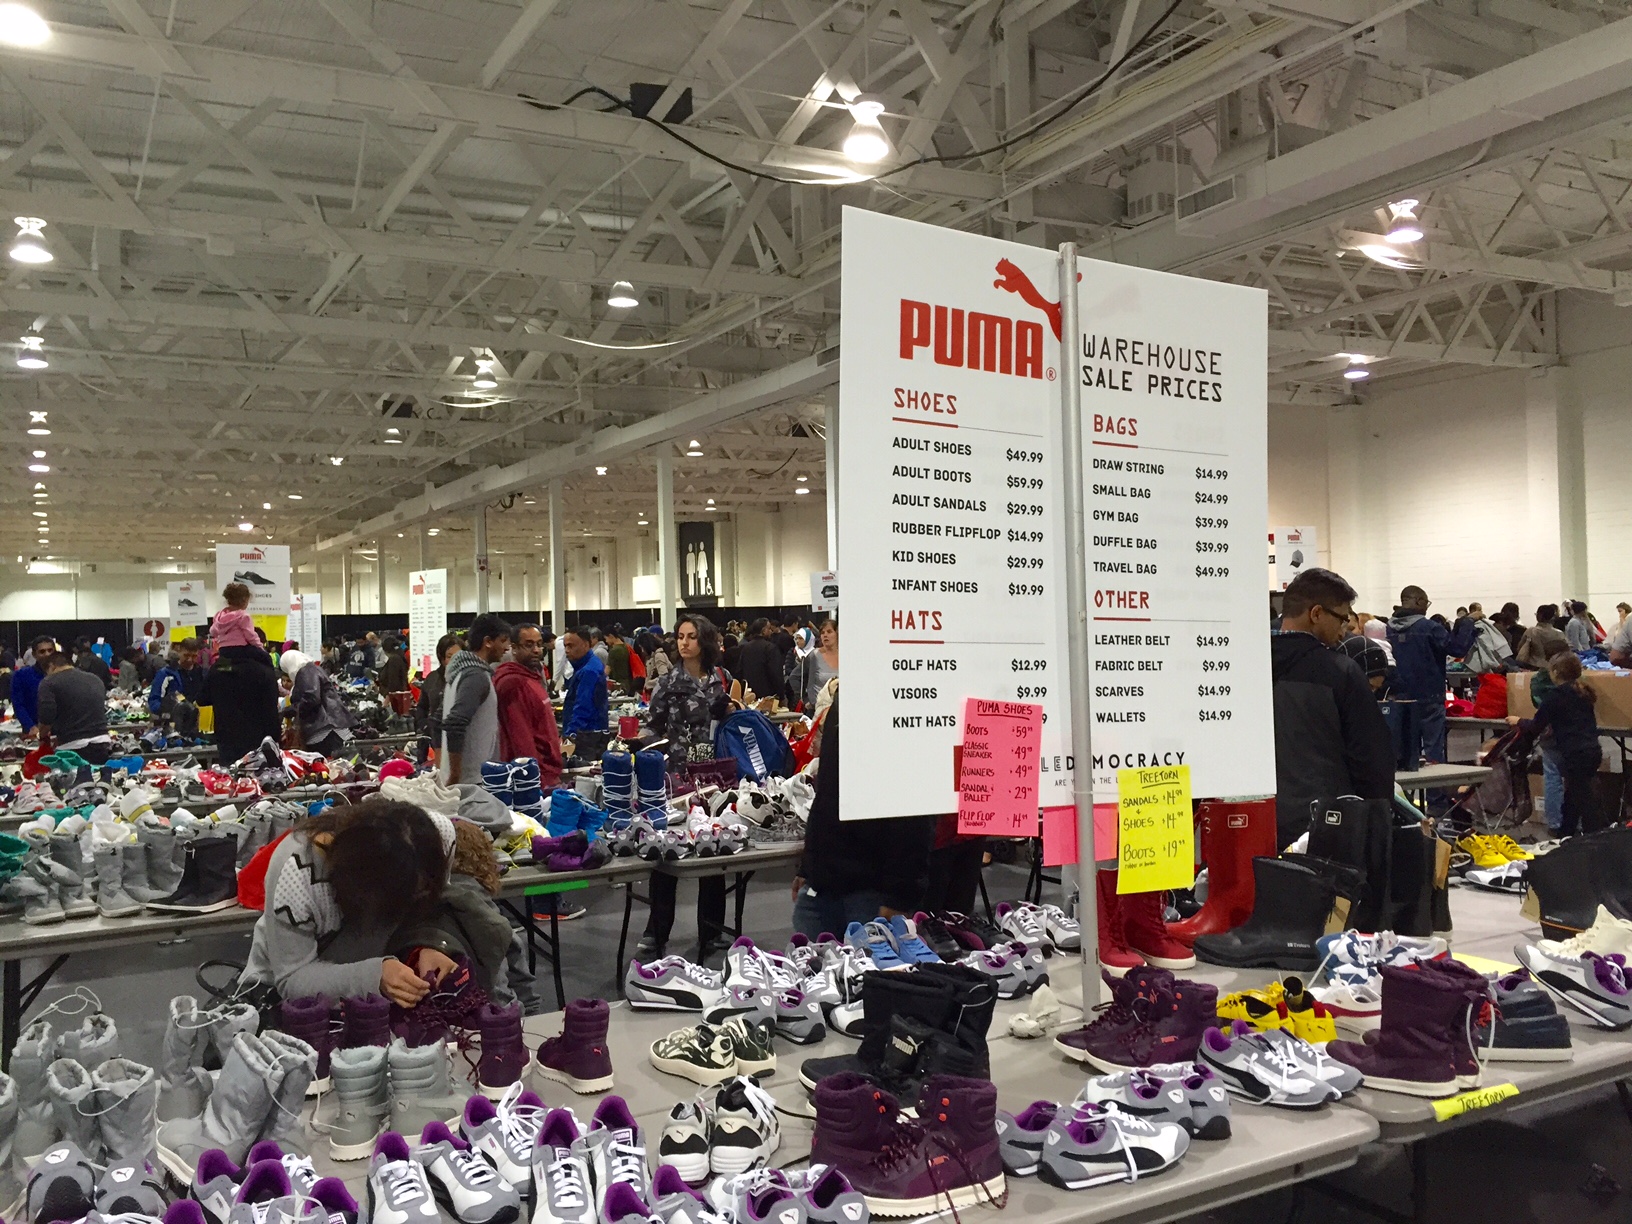 My Review of The Puma Warehouse Sale 